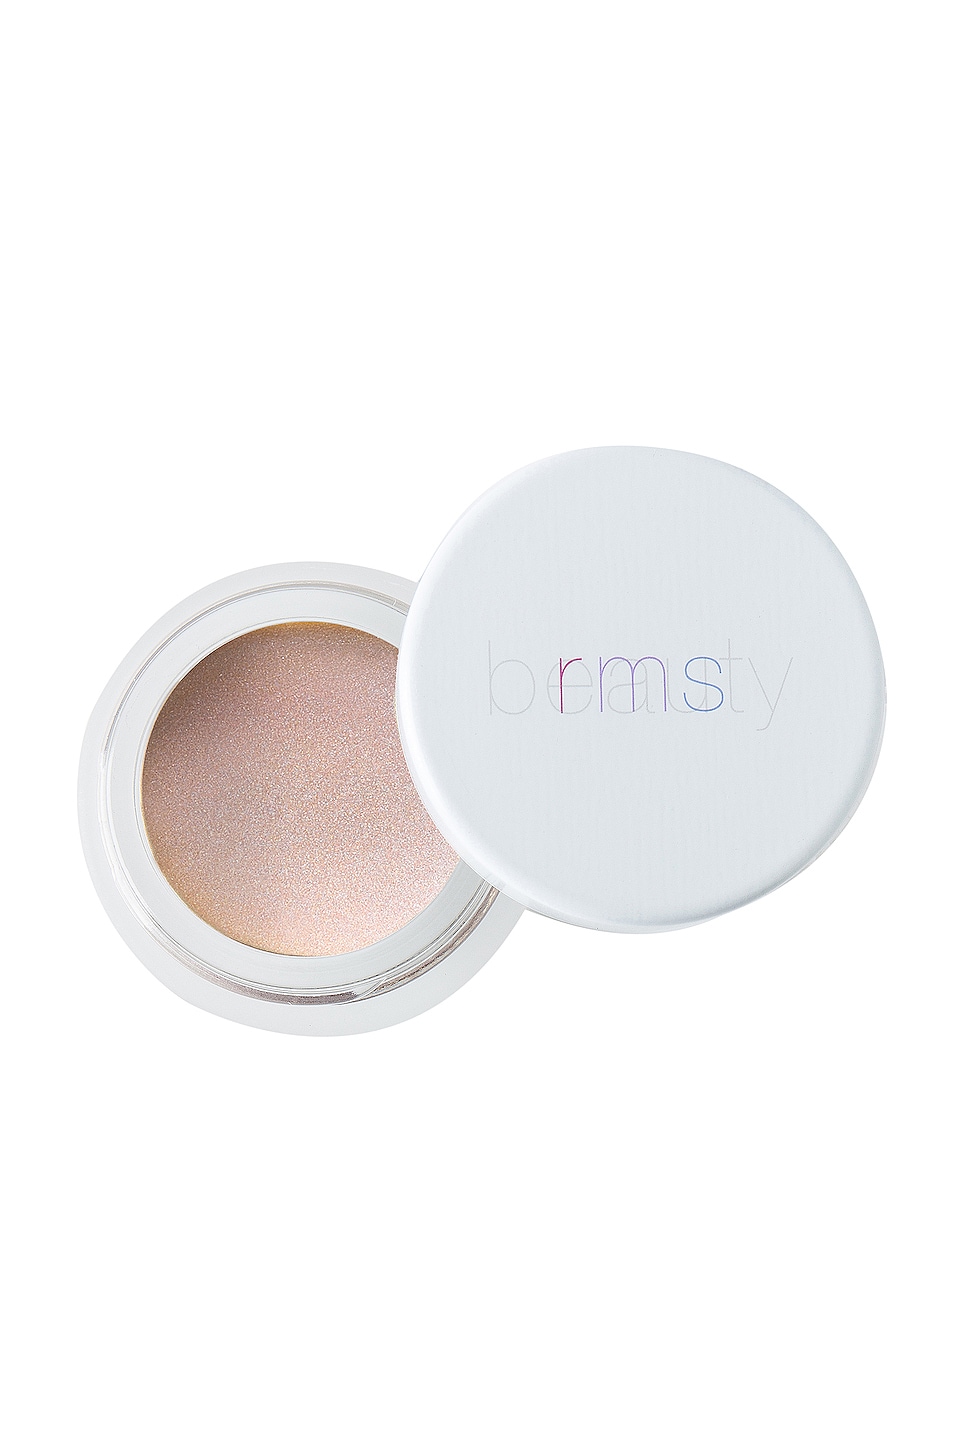 RMS BEAUTY CHAMPAGNE ROSE LUMINIZER,RMSR-WU103